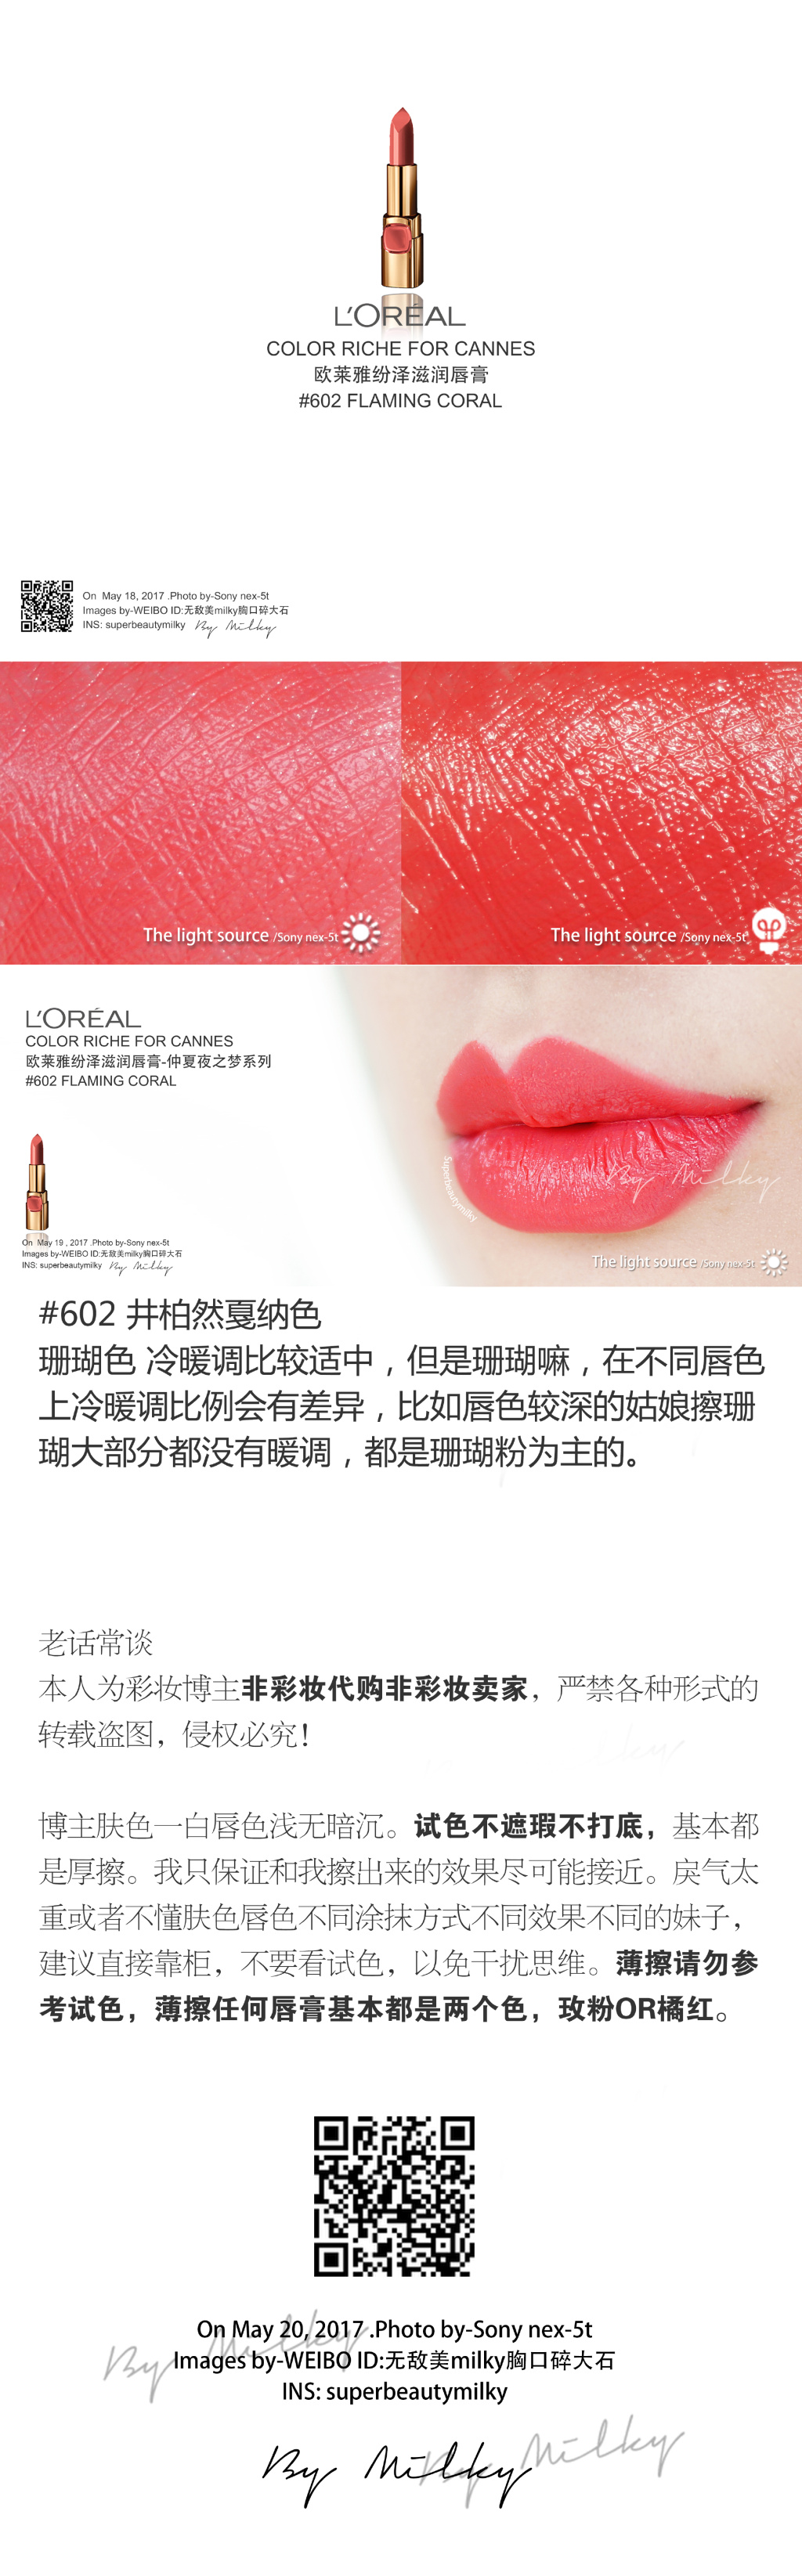 L'OREAL COLOR RICHE FOR CANNES/欧莱雅纷泽滋润唇膏试色